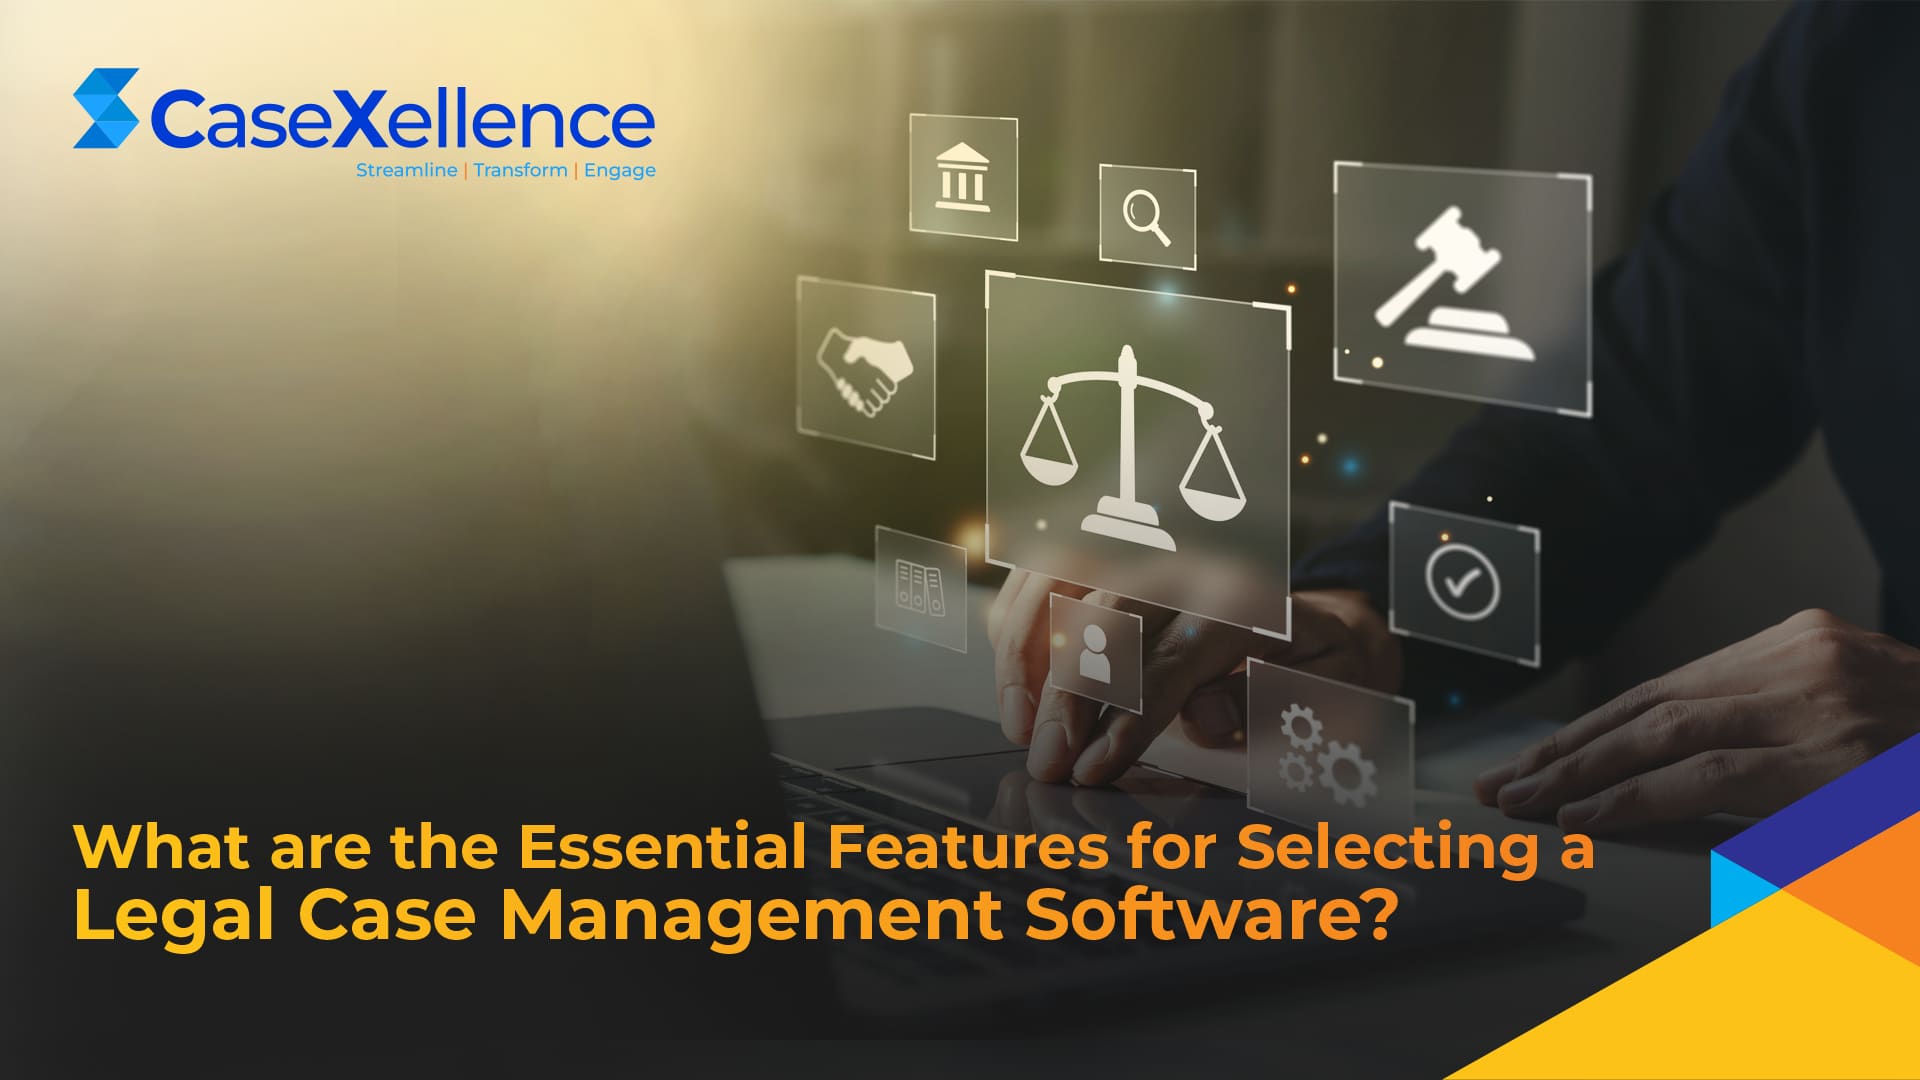 What are the Essential Features for Selecting a Legal Case Management Software?